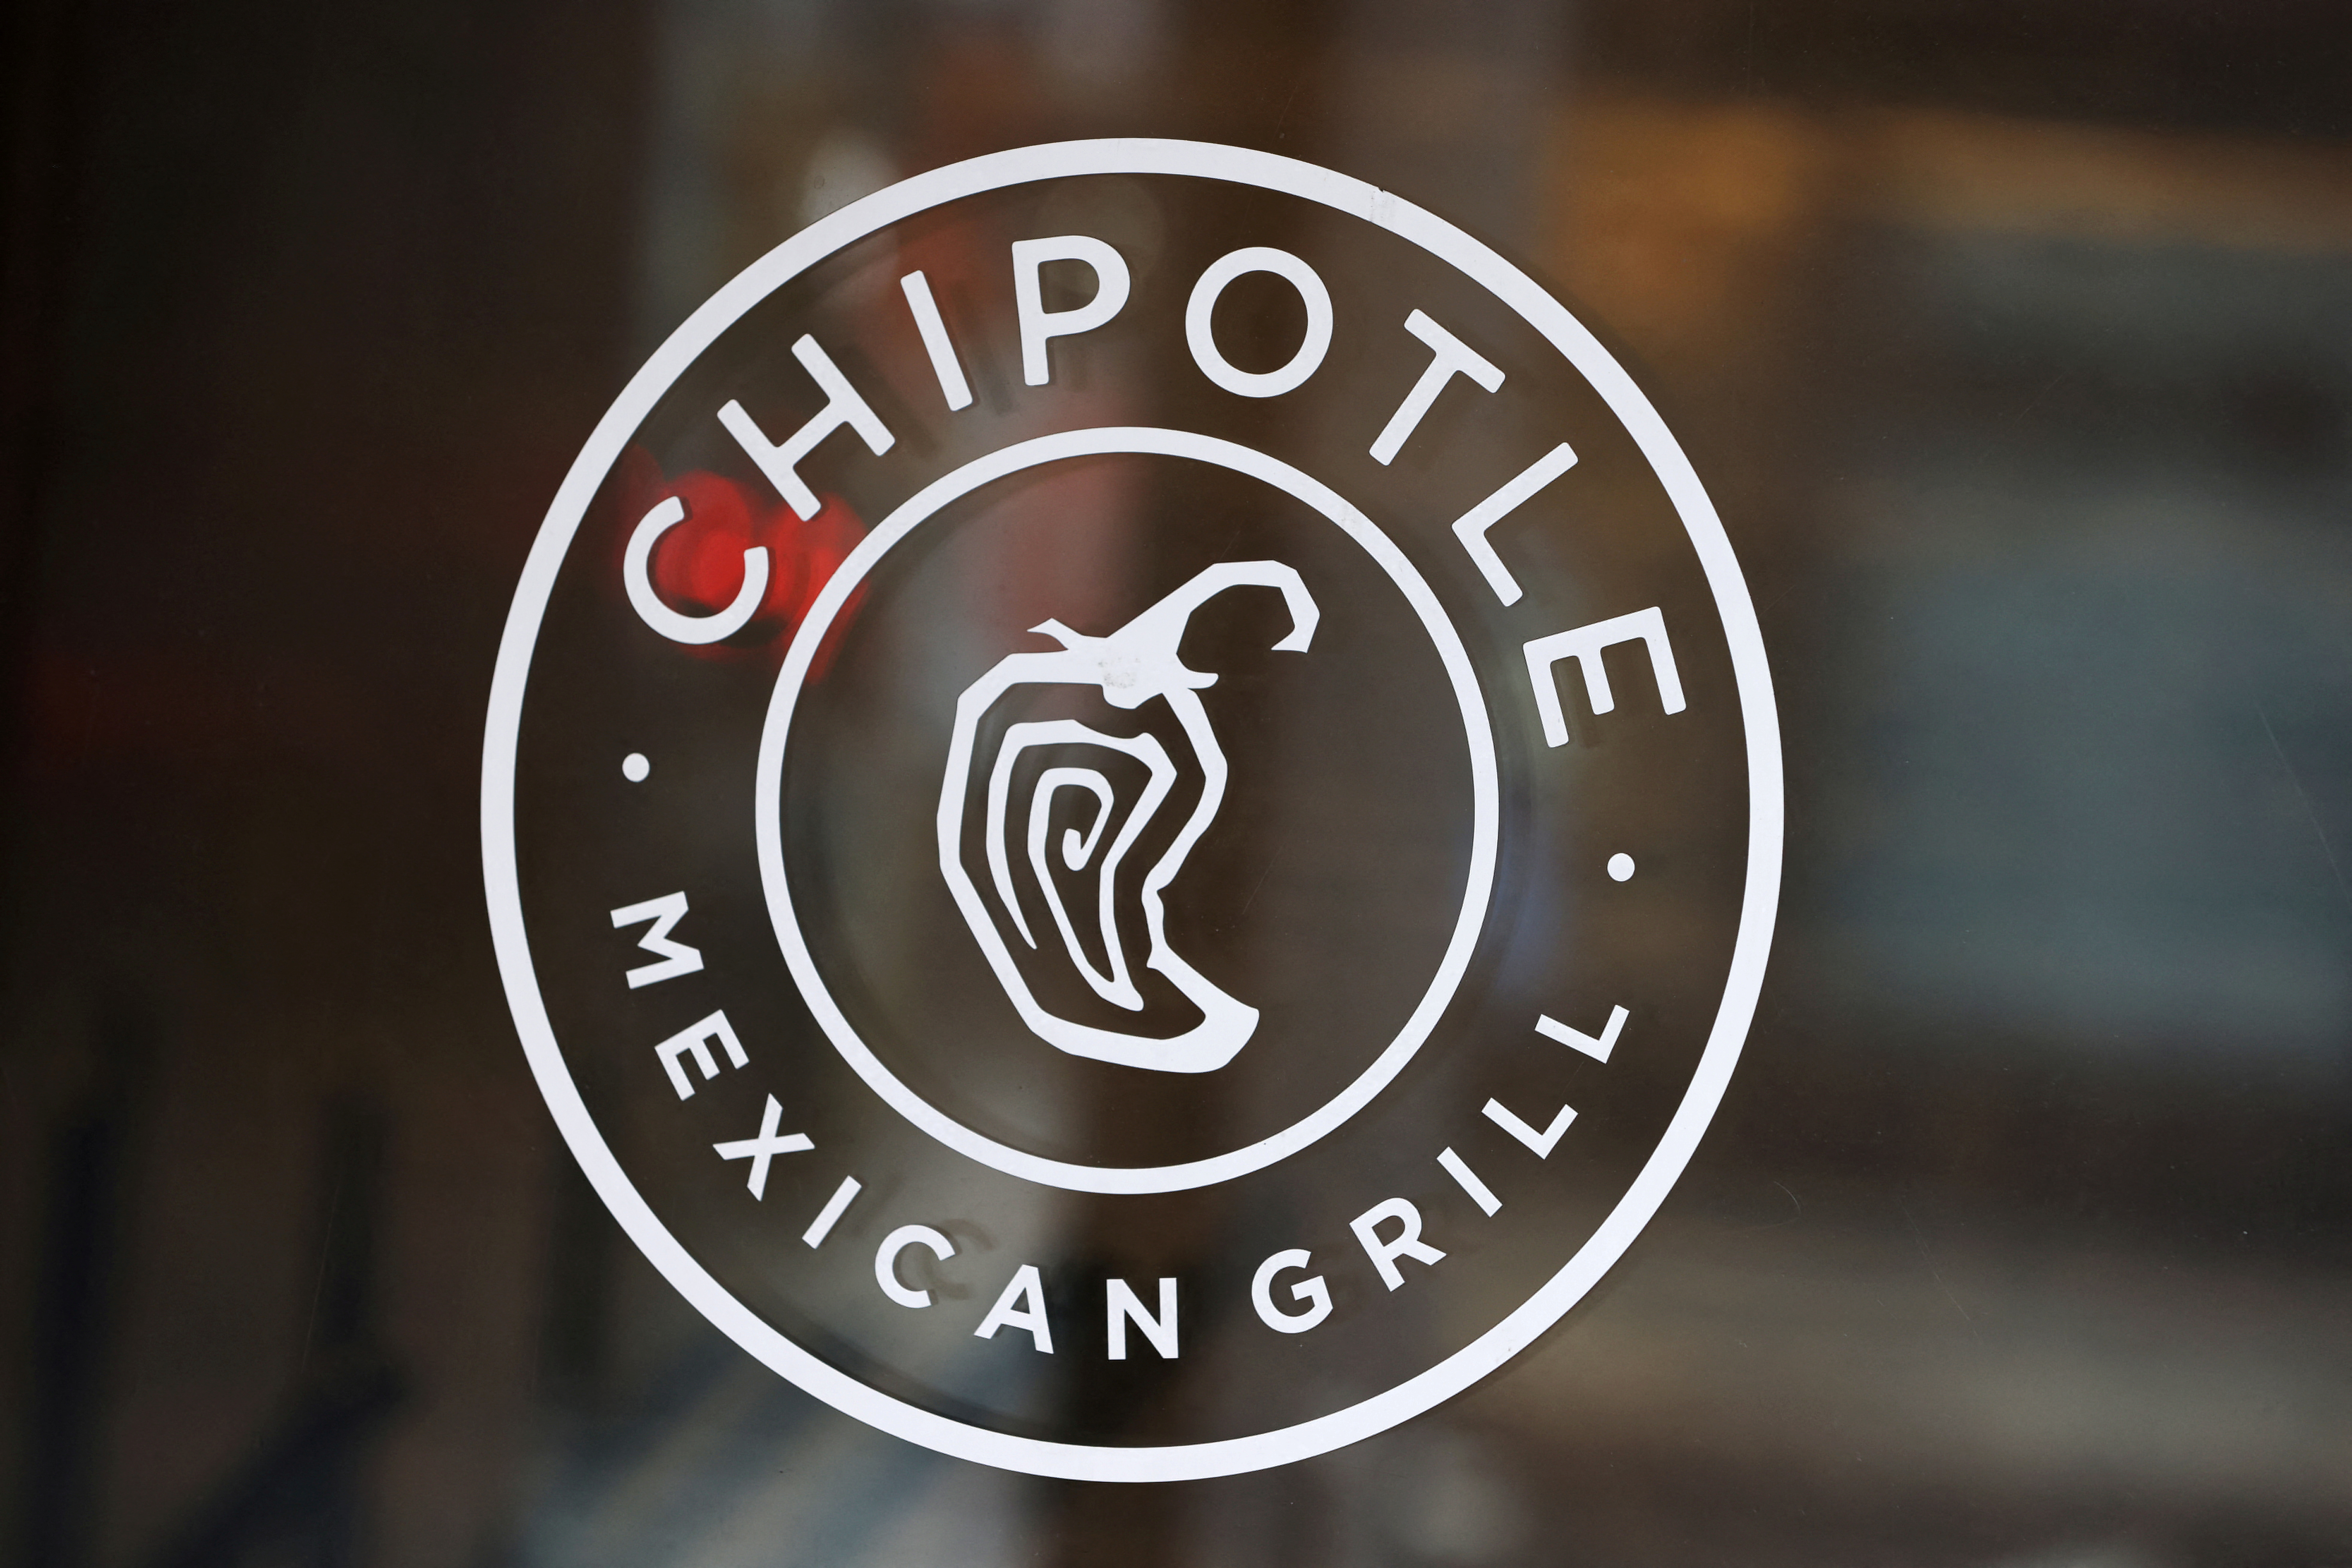 The logo of Chipotle is seen on one of their restaurants in Manhattan, New York City